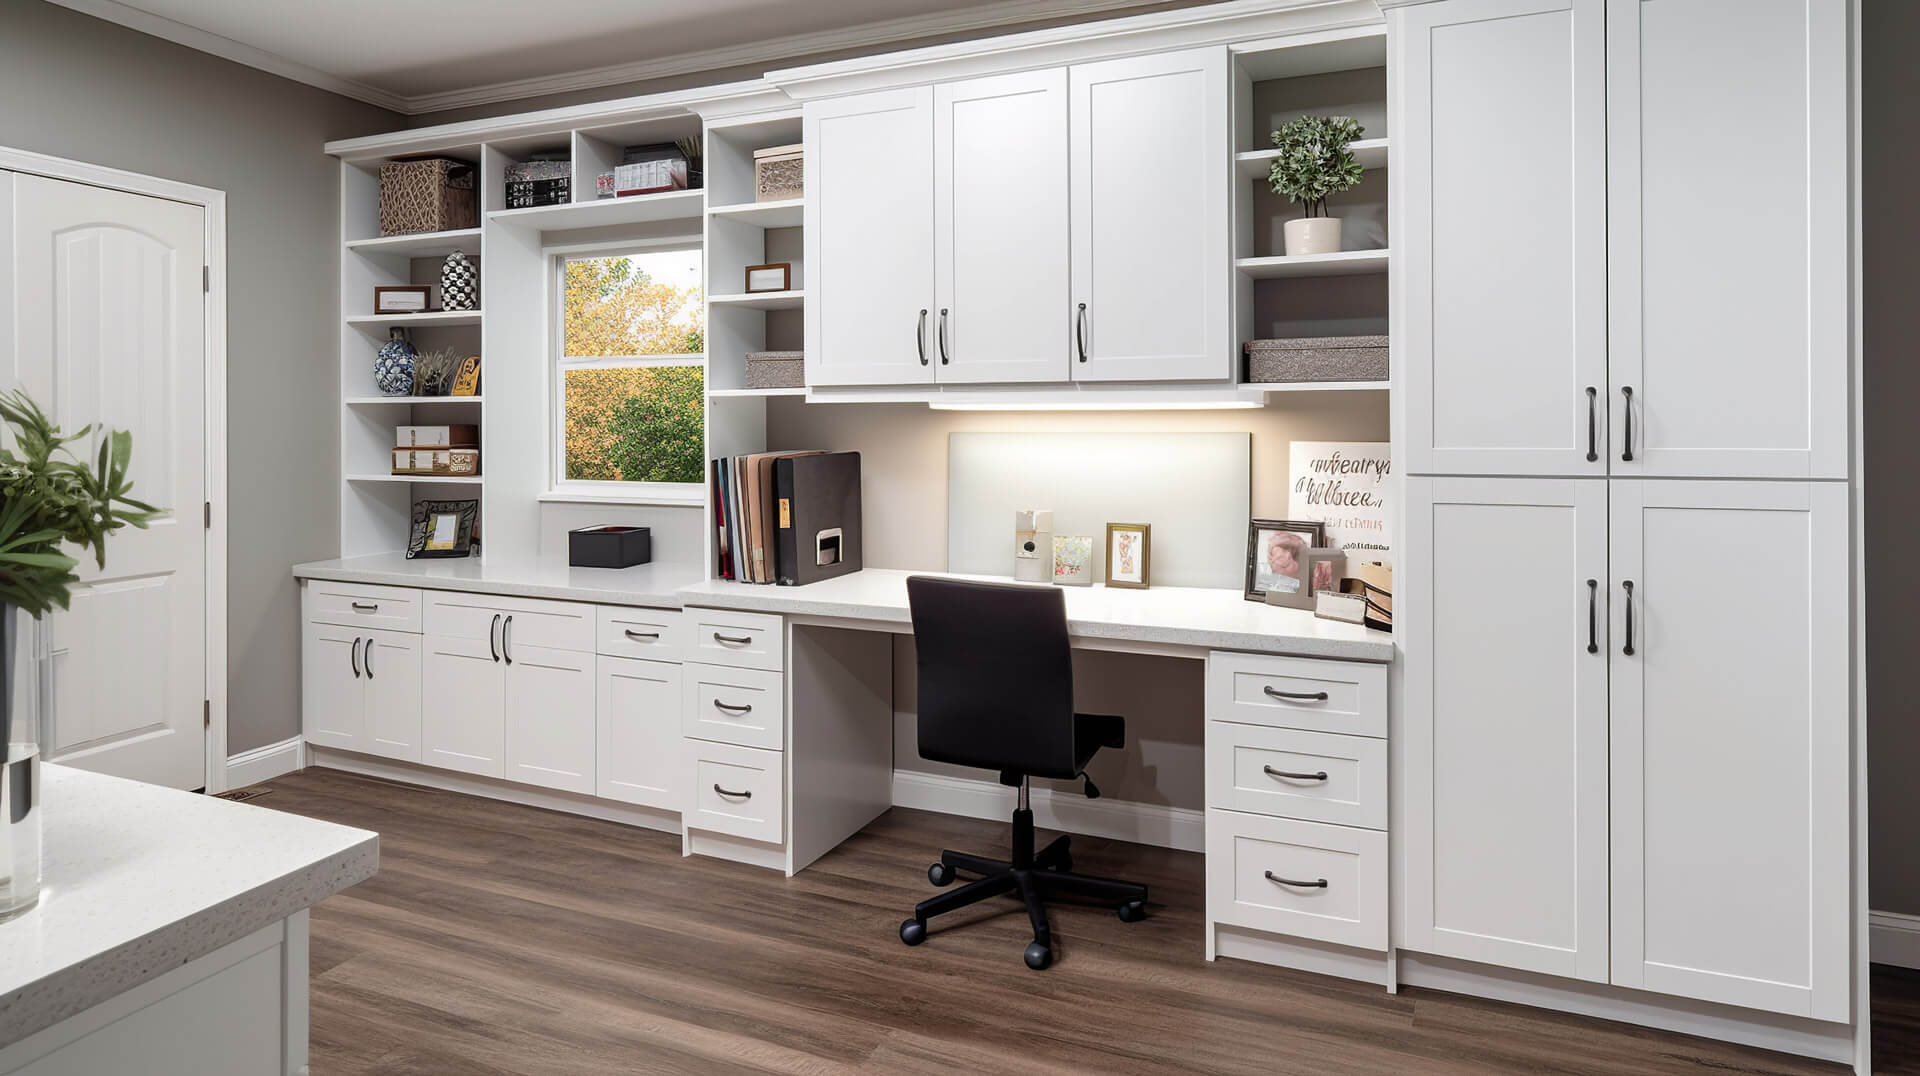 custom built-in cabinets